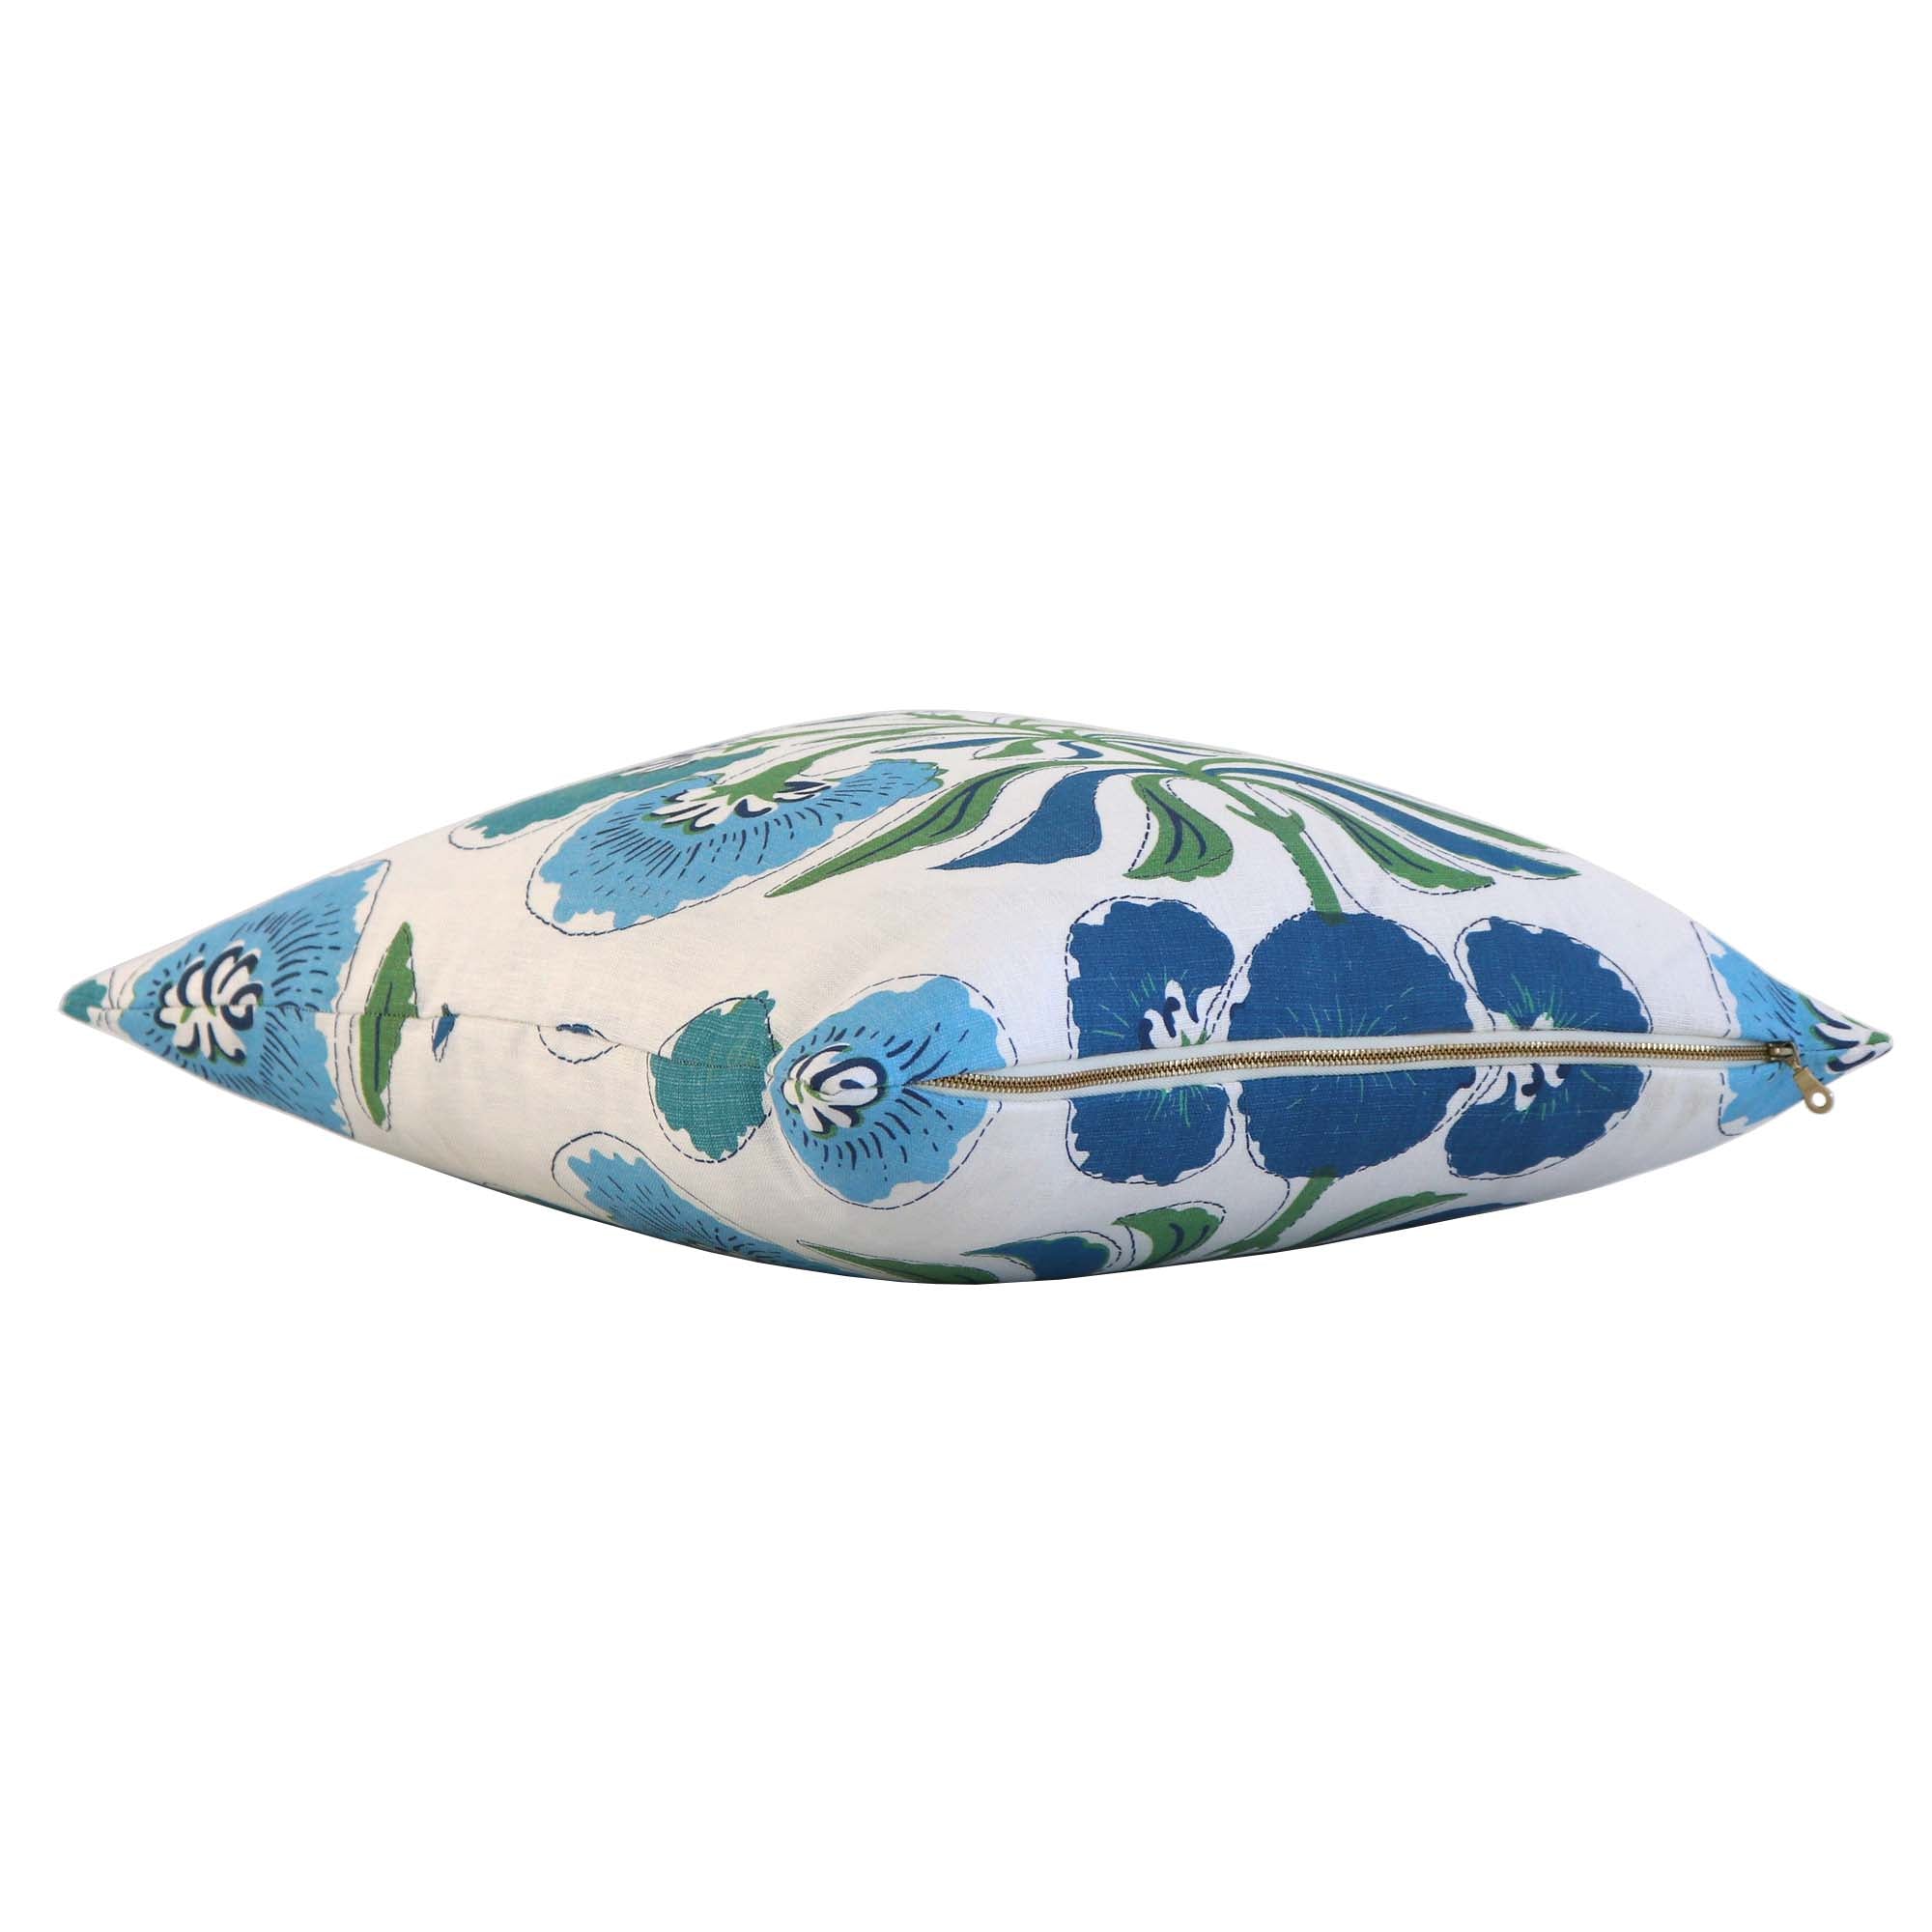 Thibaut Tybee Tree Blue and Green Floral Block Print Designer Linen Decorative Throw Pillow Cover with Exposed Brass YKK Zipper